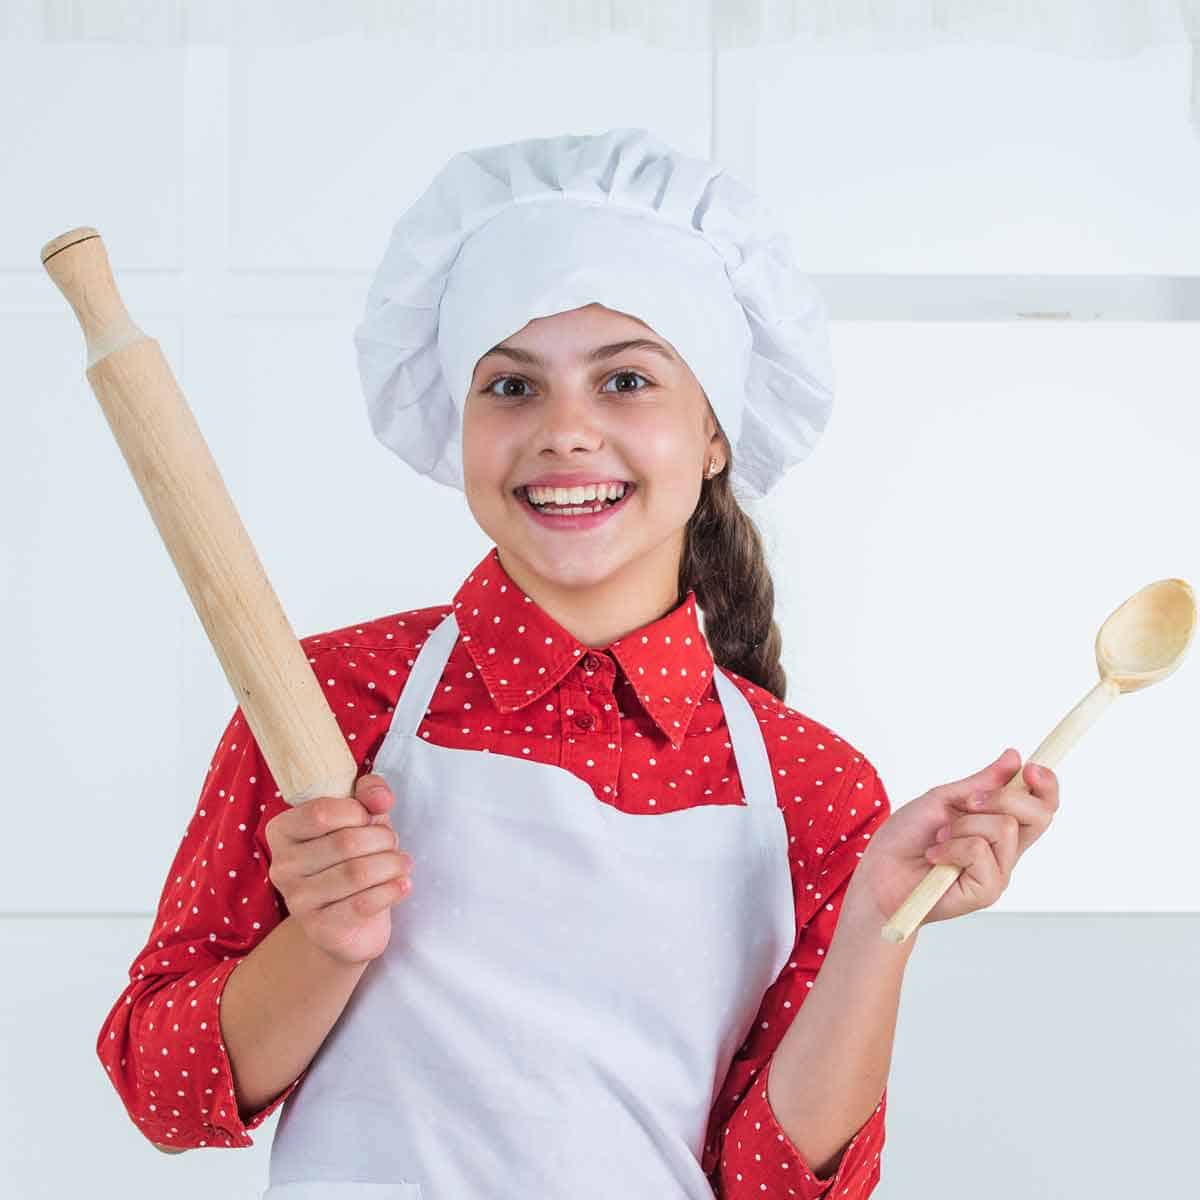 Tween girl with chef hat and apron holding a wooden spoon and rolling pin.